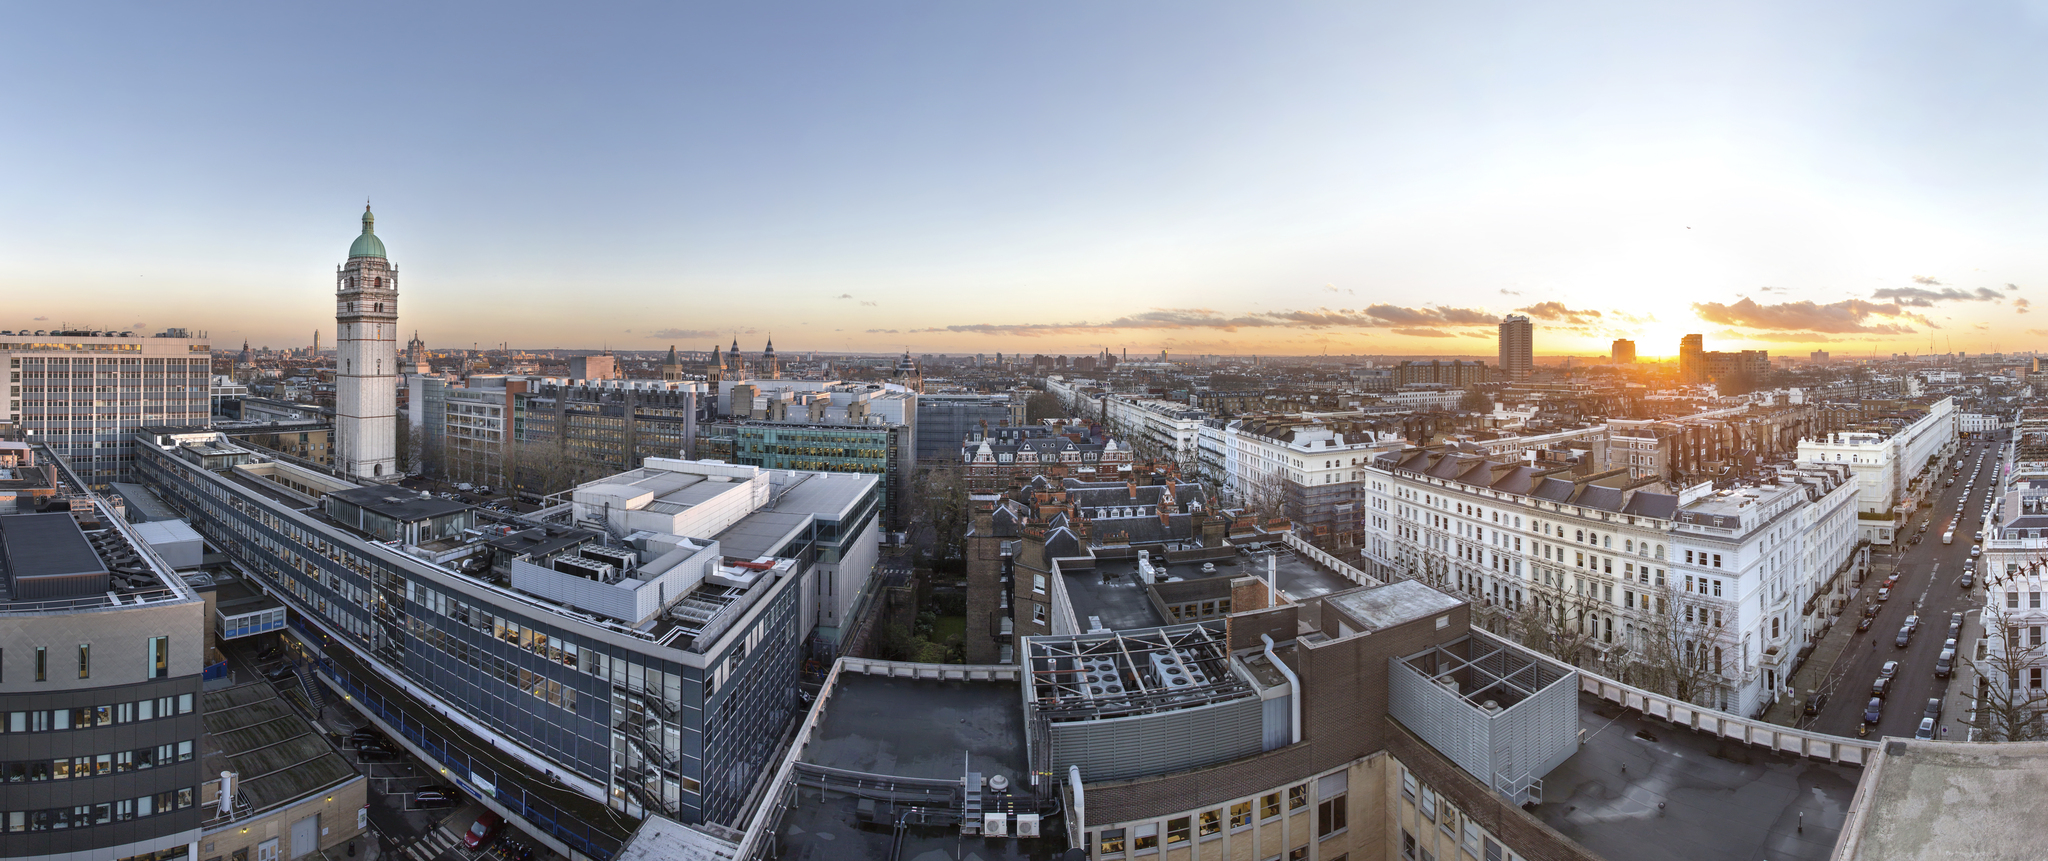 Imperial College London image